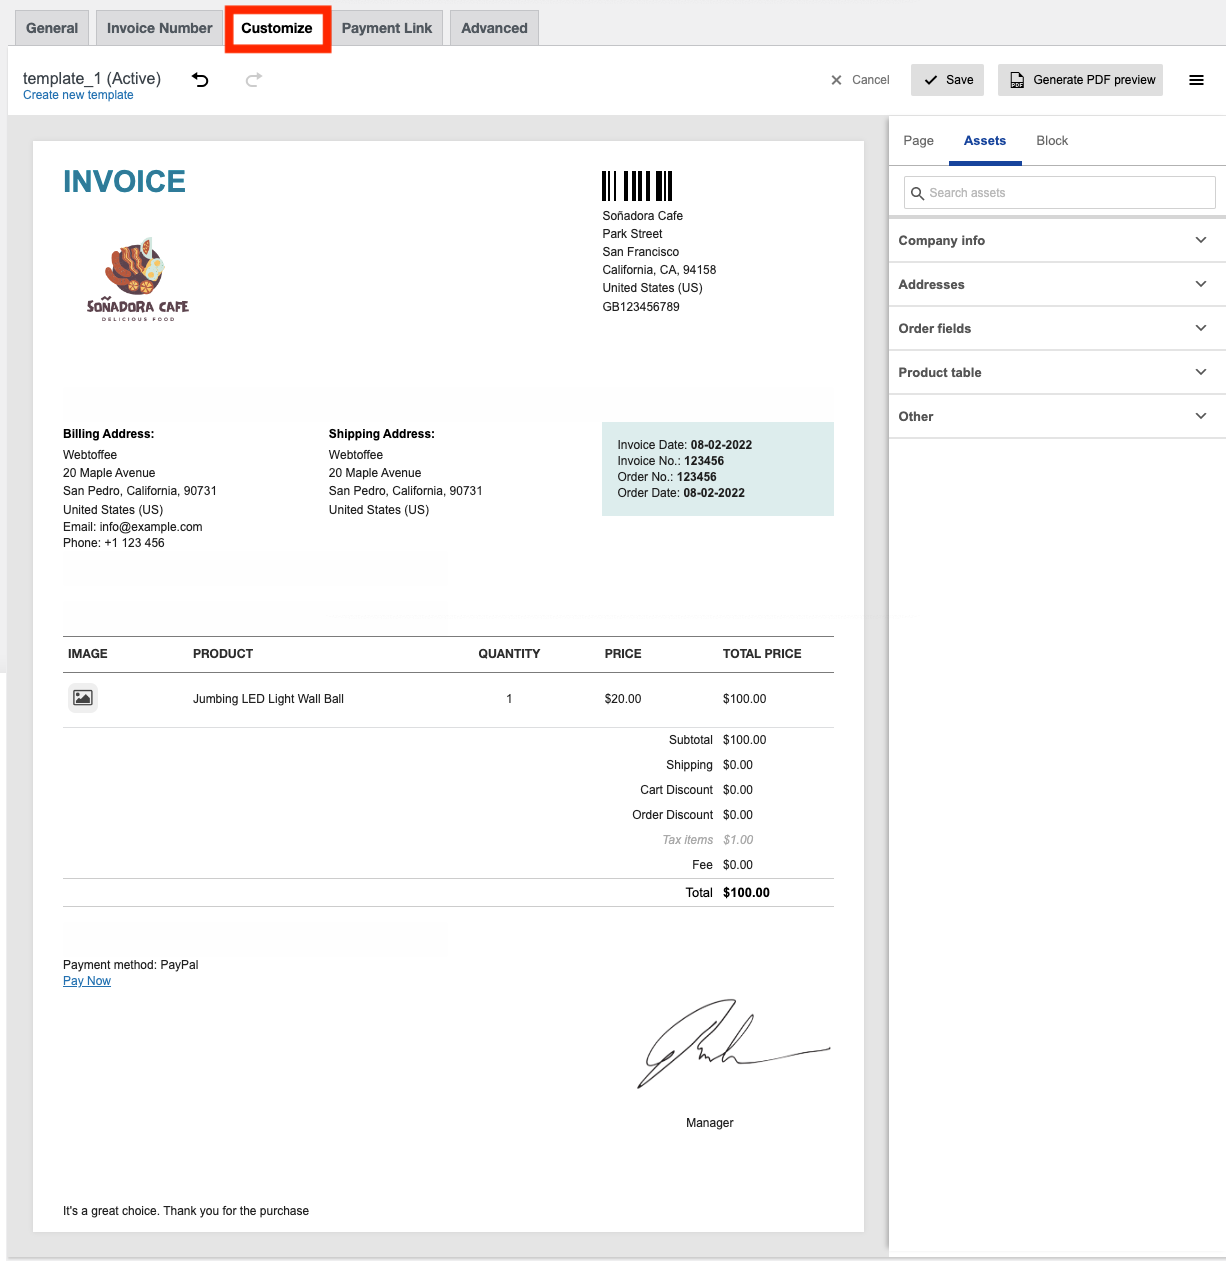 Customize tab layout of an Invoice